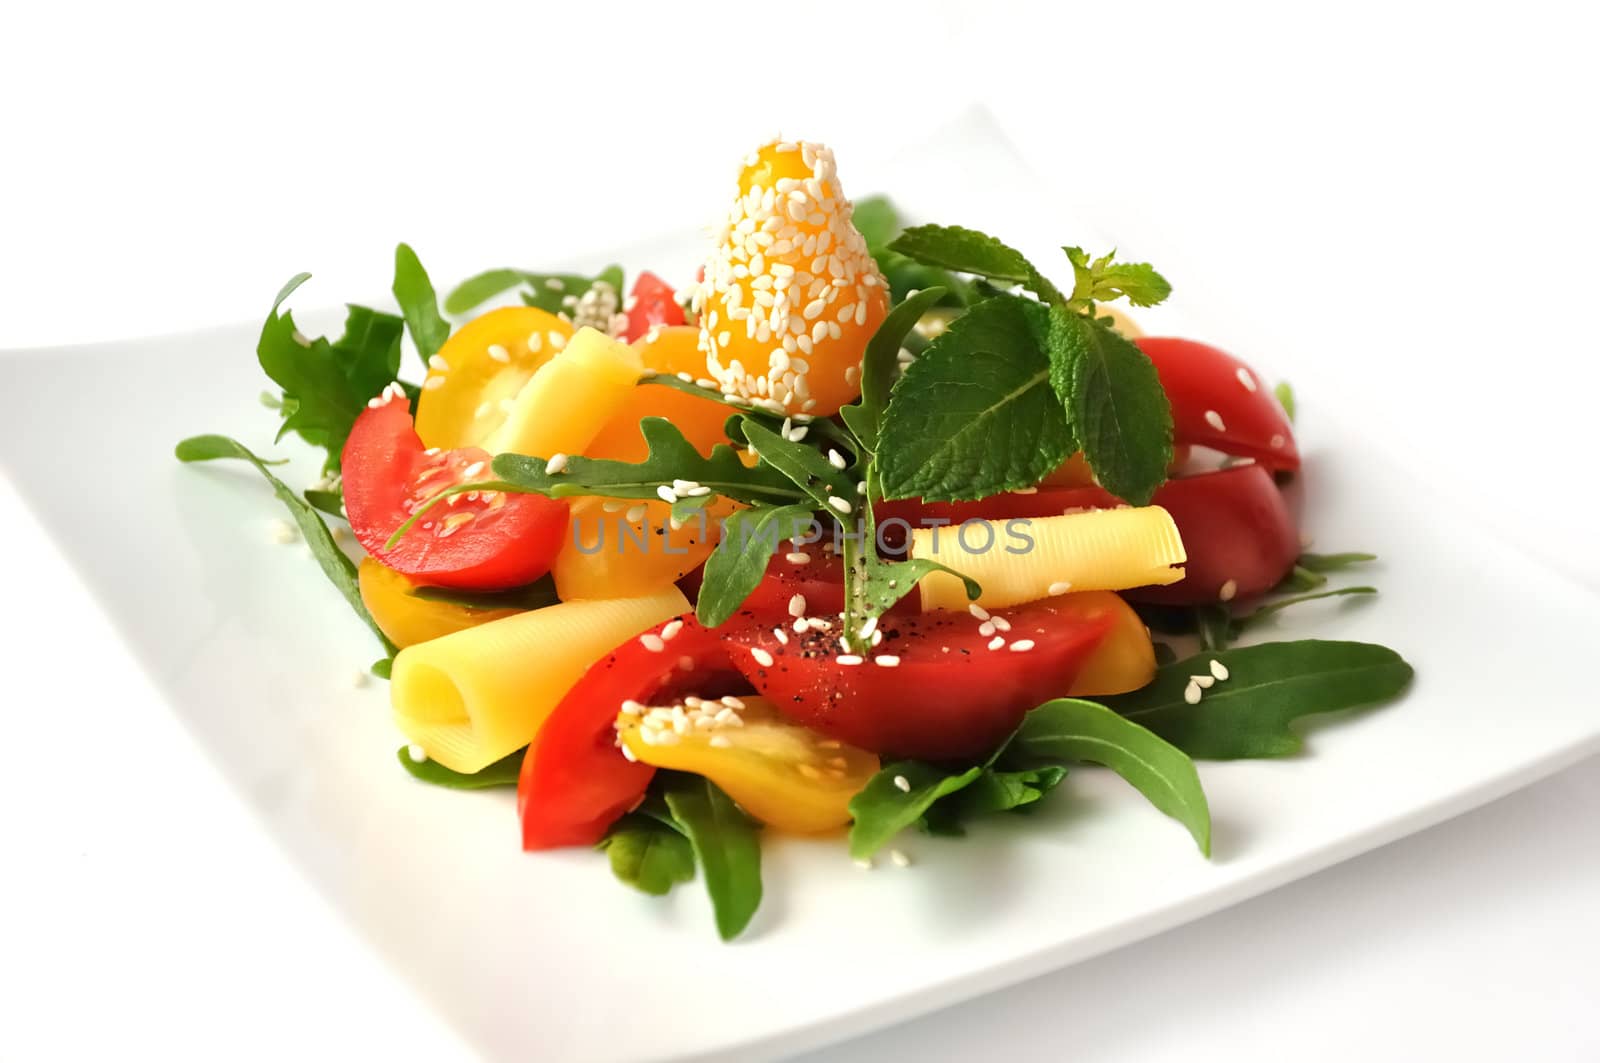 salad of red and yellow tomatoes by Apolonia